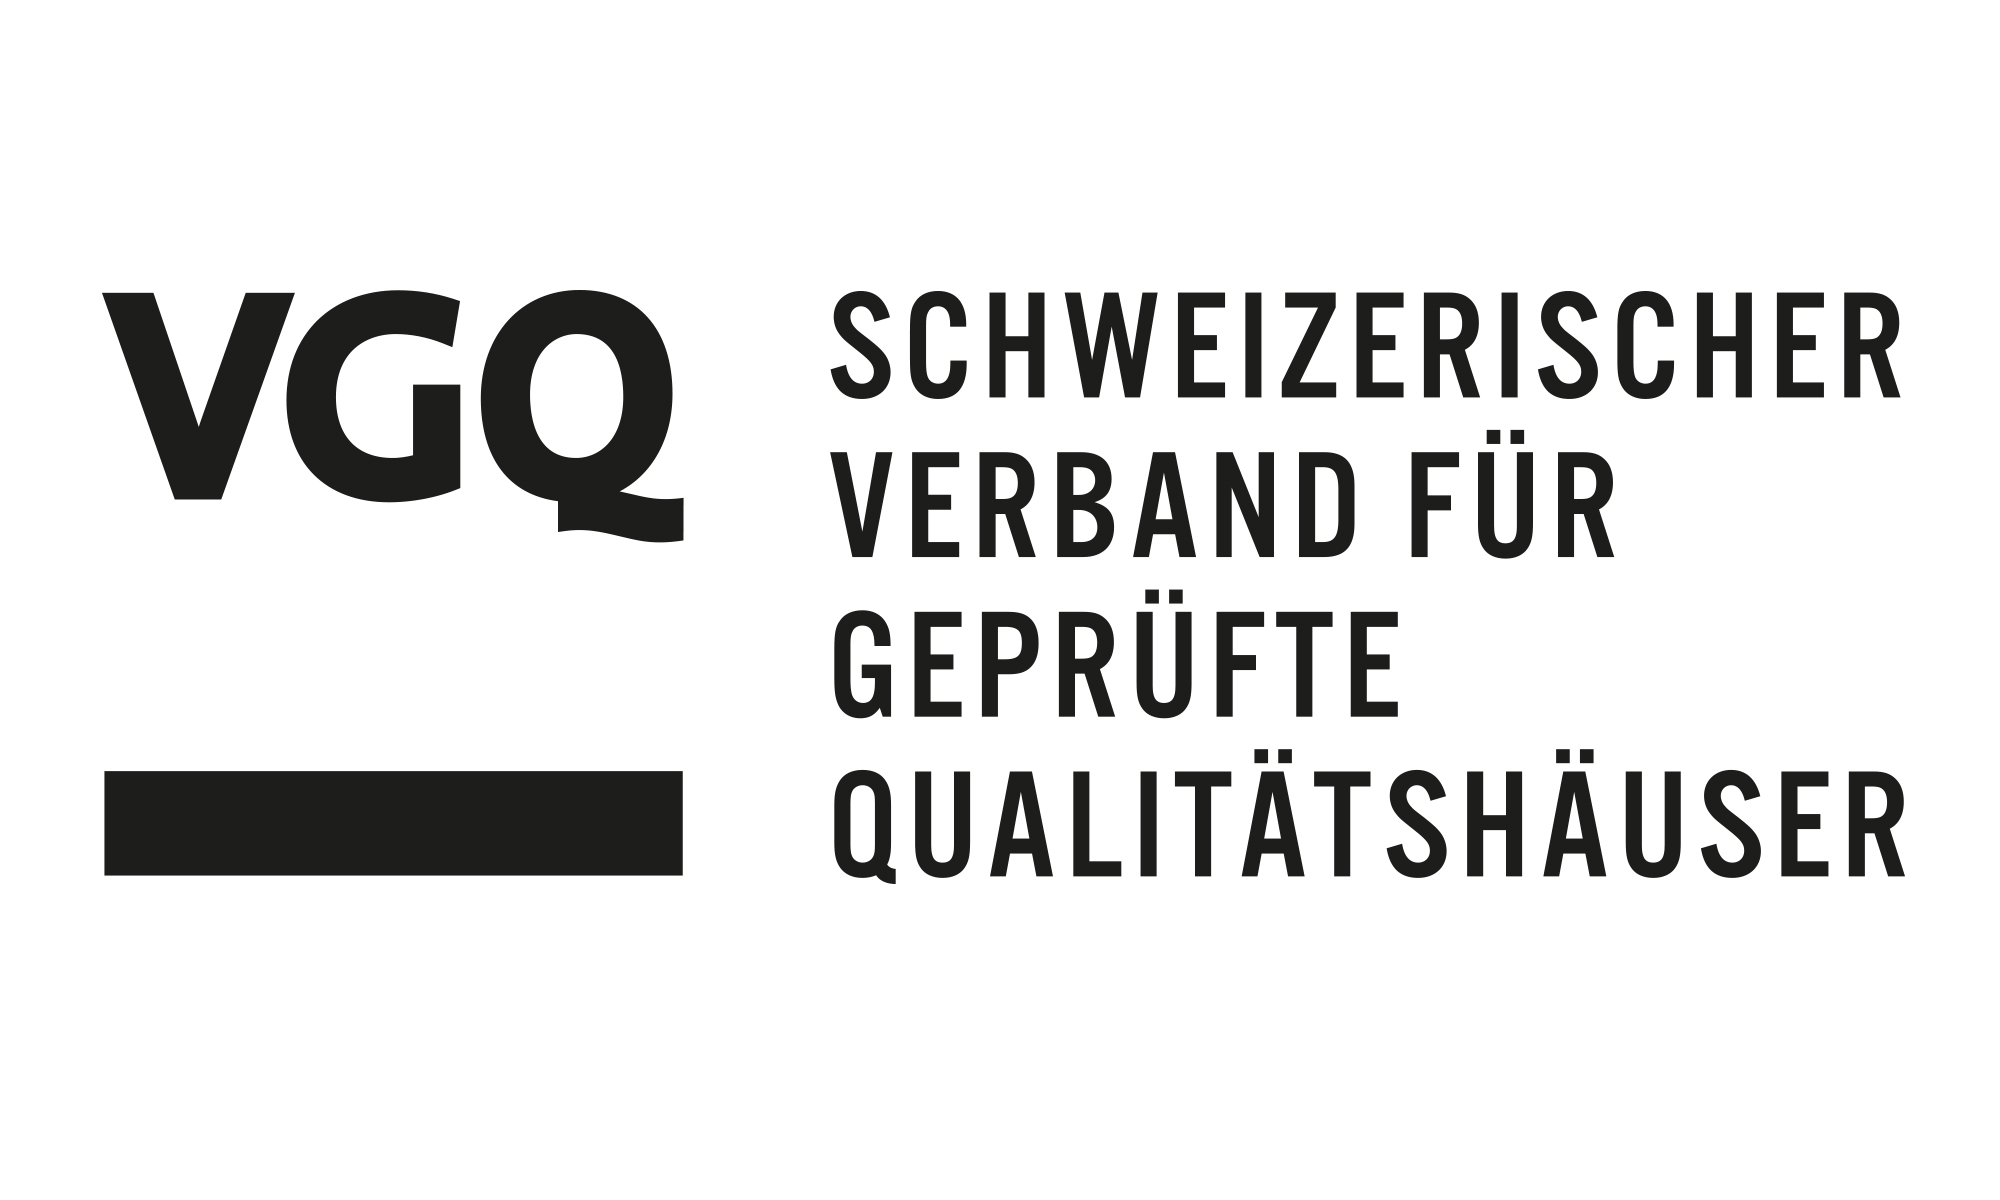 Illustration of the VGQ Lab from the Swiss Association for Certified Quality Houses